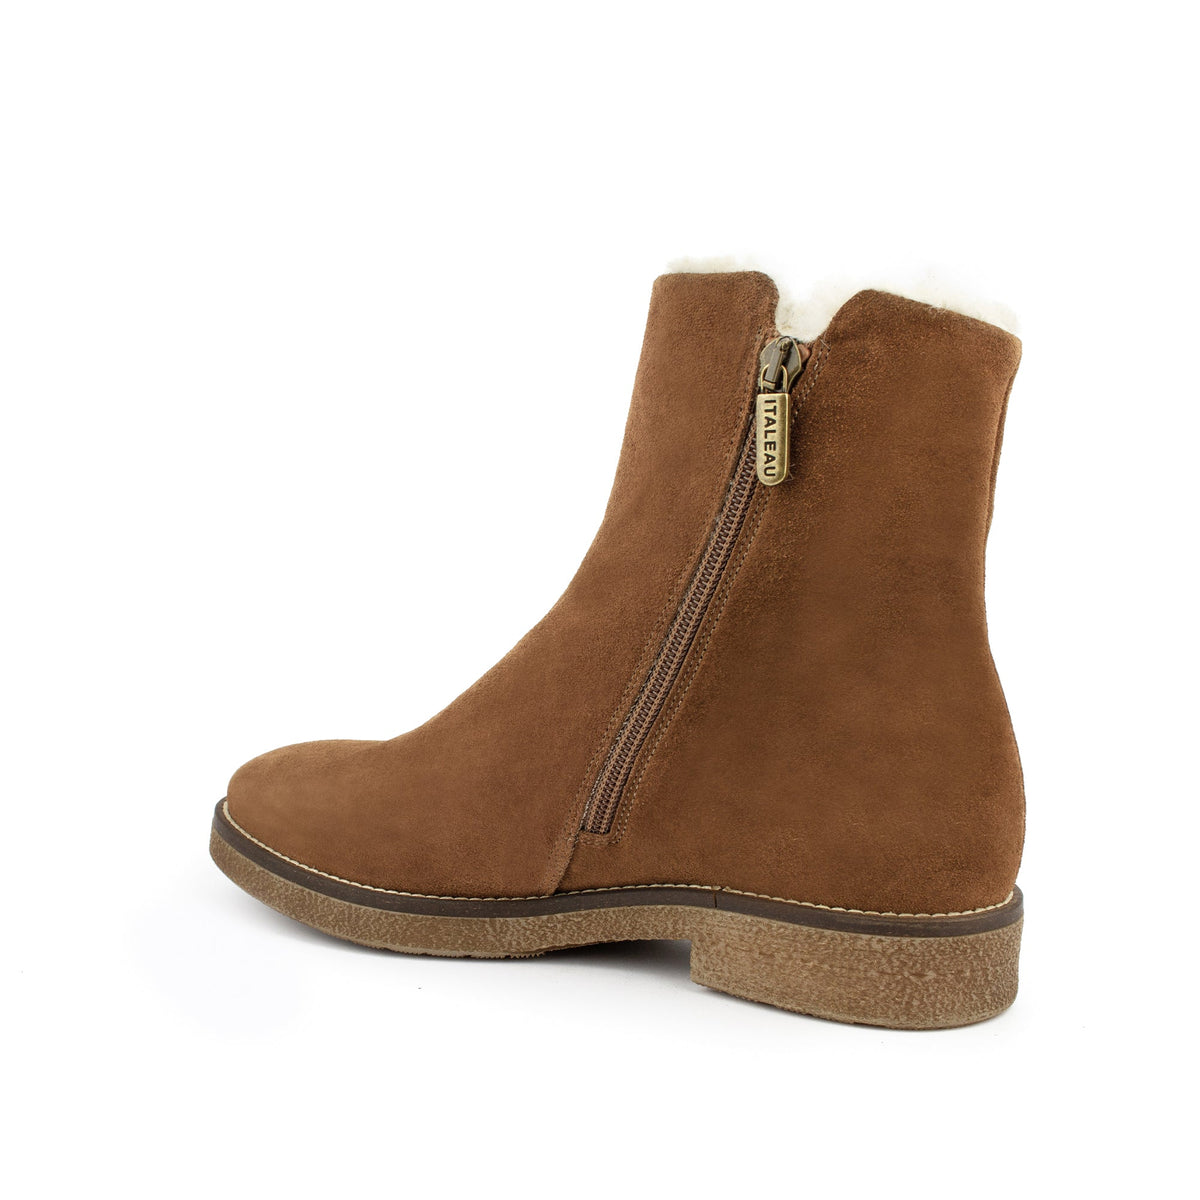 Italeau Fiorella booties are winter-weather ready, lined in real shearling and made in Italy